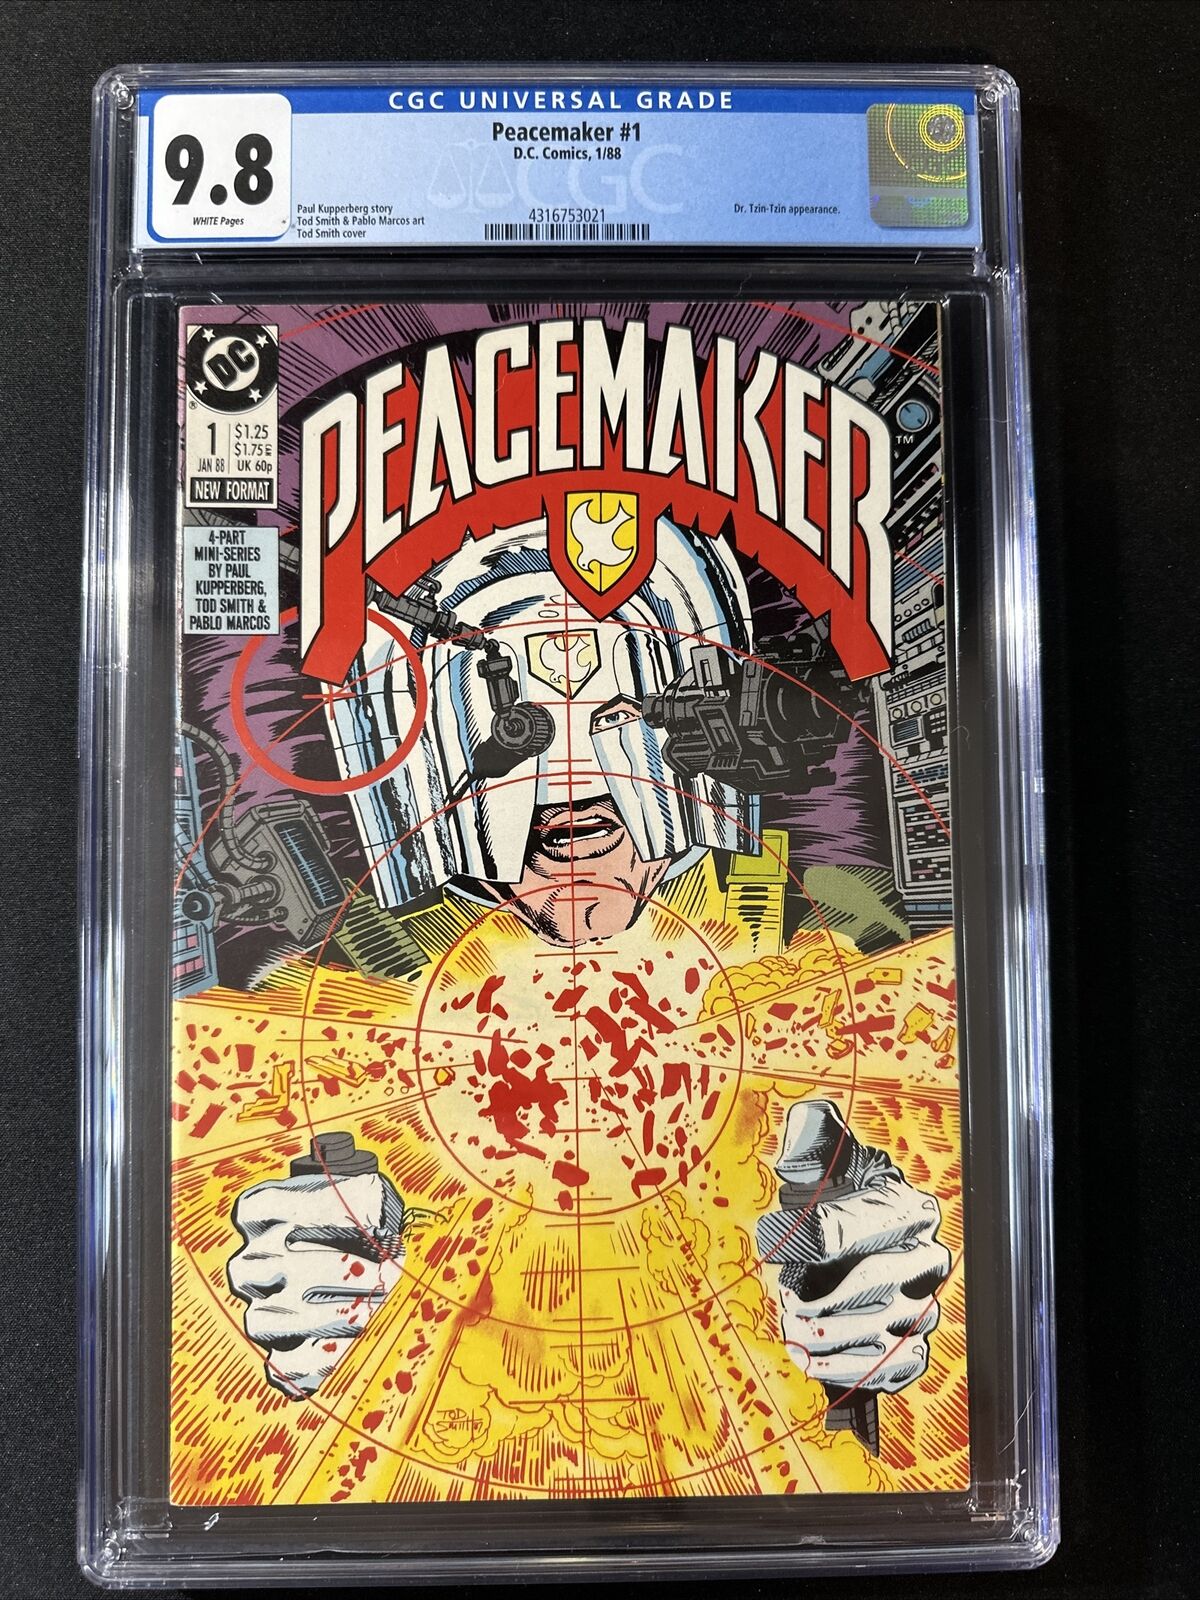 Peacemaker #1 CGC 9.8 1988 DC Comics White Pages 1st Print